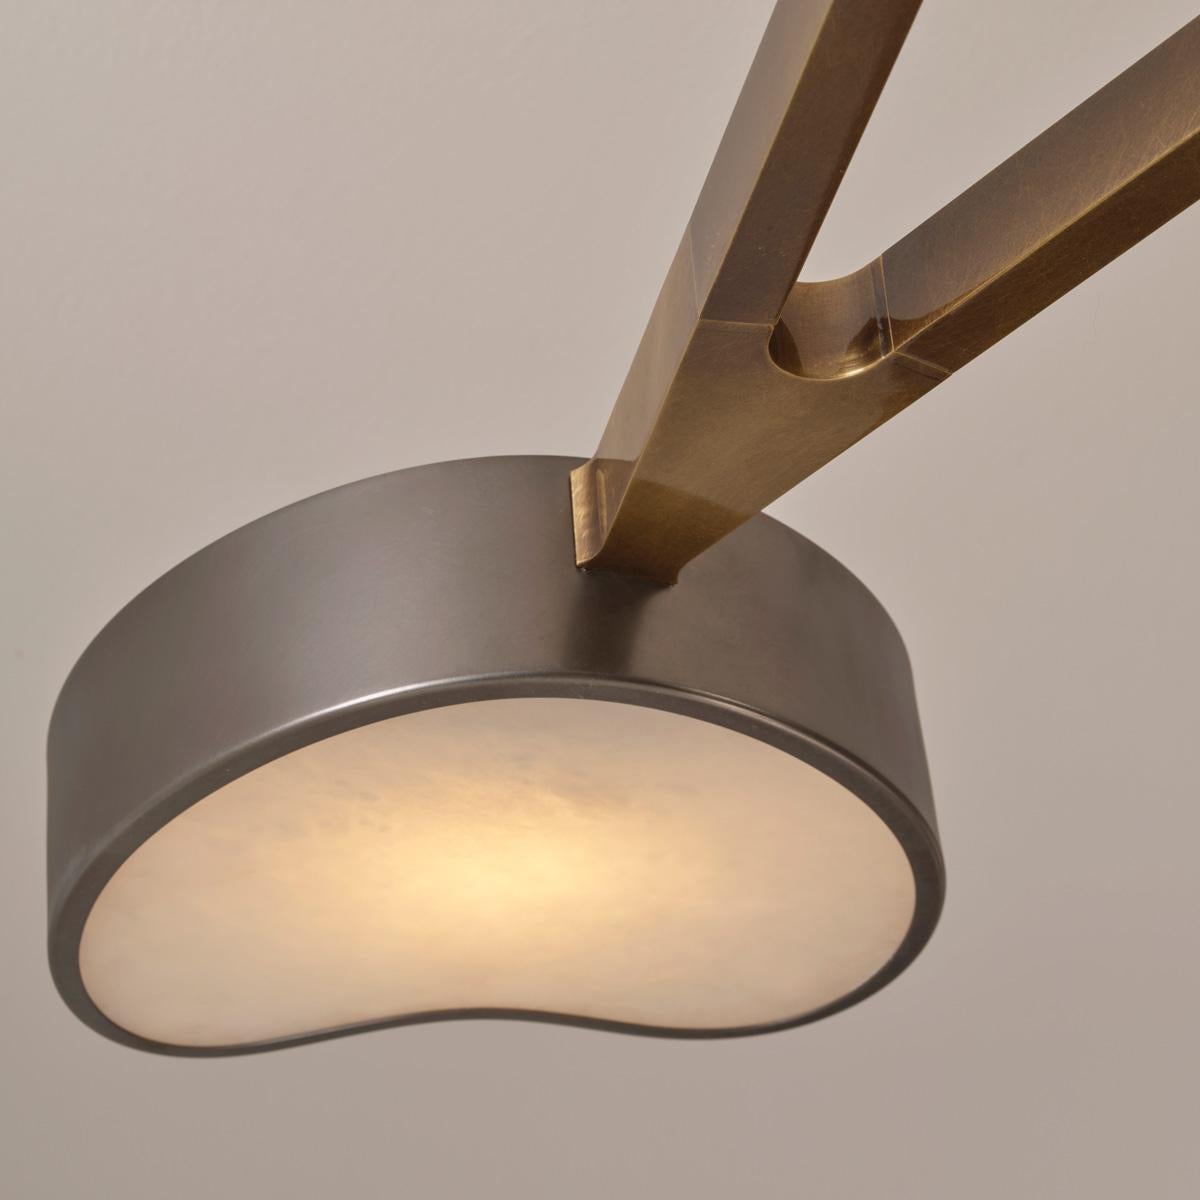 Brass Cuore N.10 Ceiling Light by Gaspare Asaro. Peltro and Bronze Finish For Sale